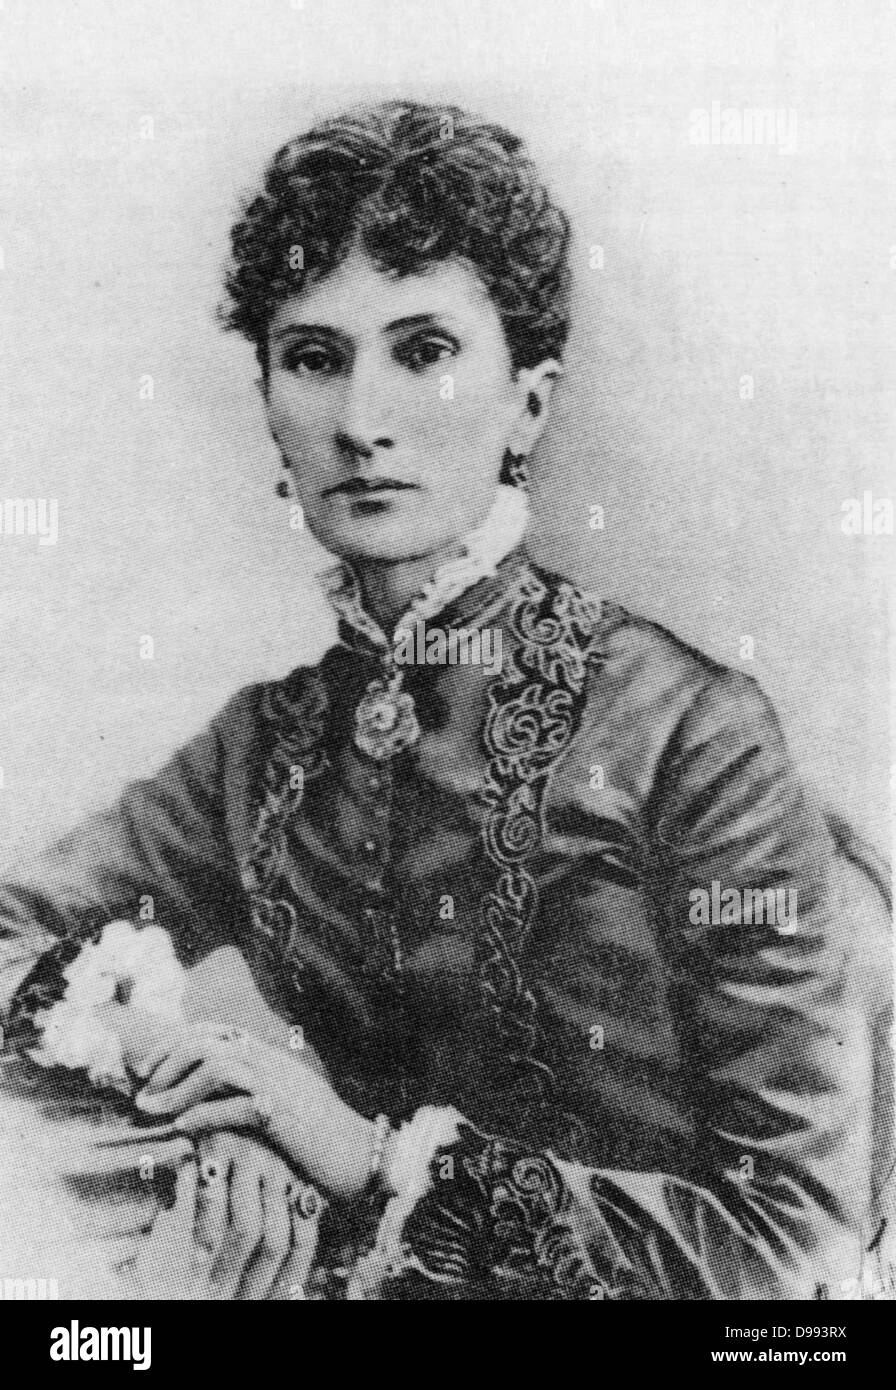 Nadezhda von Meck (1831 - 1894) Russian businesswoman, who is best known today for her artistic relationship with Pyotr Ilyich Tchaikovsky. She supported him financially for 13 years, enabling him to devote himself full-time to composition, but she stipu Stock Photo